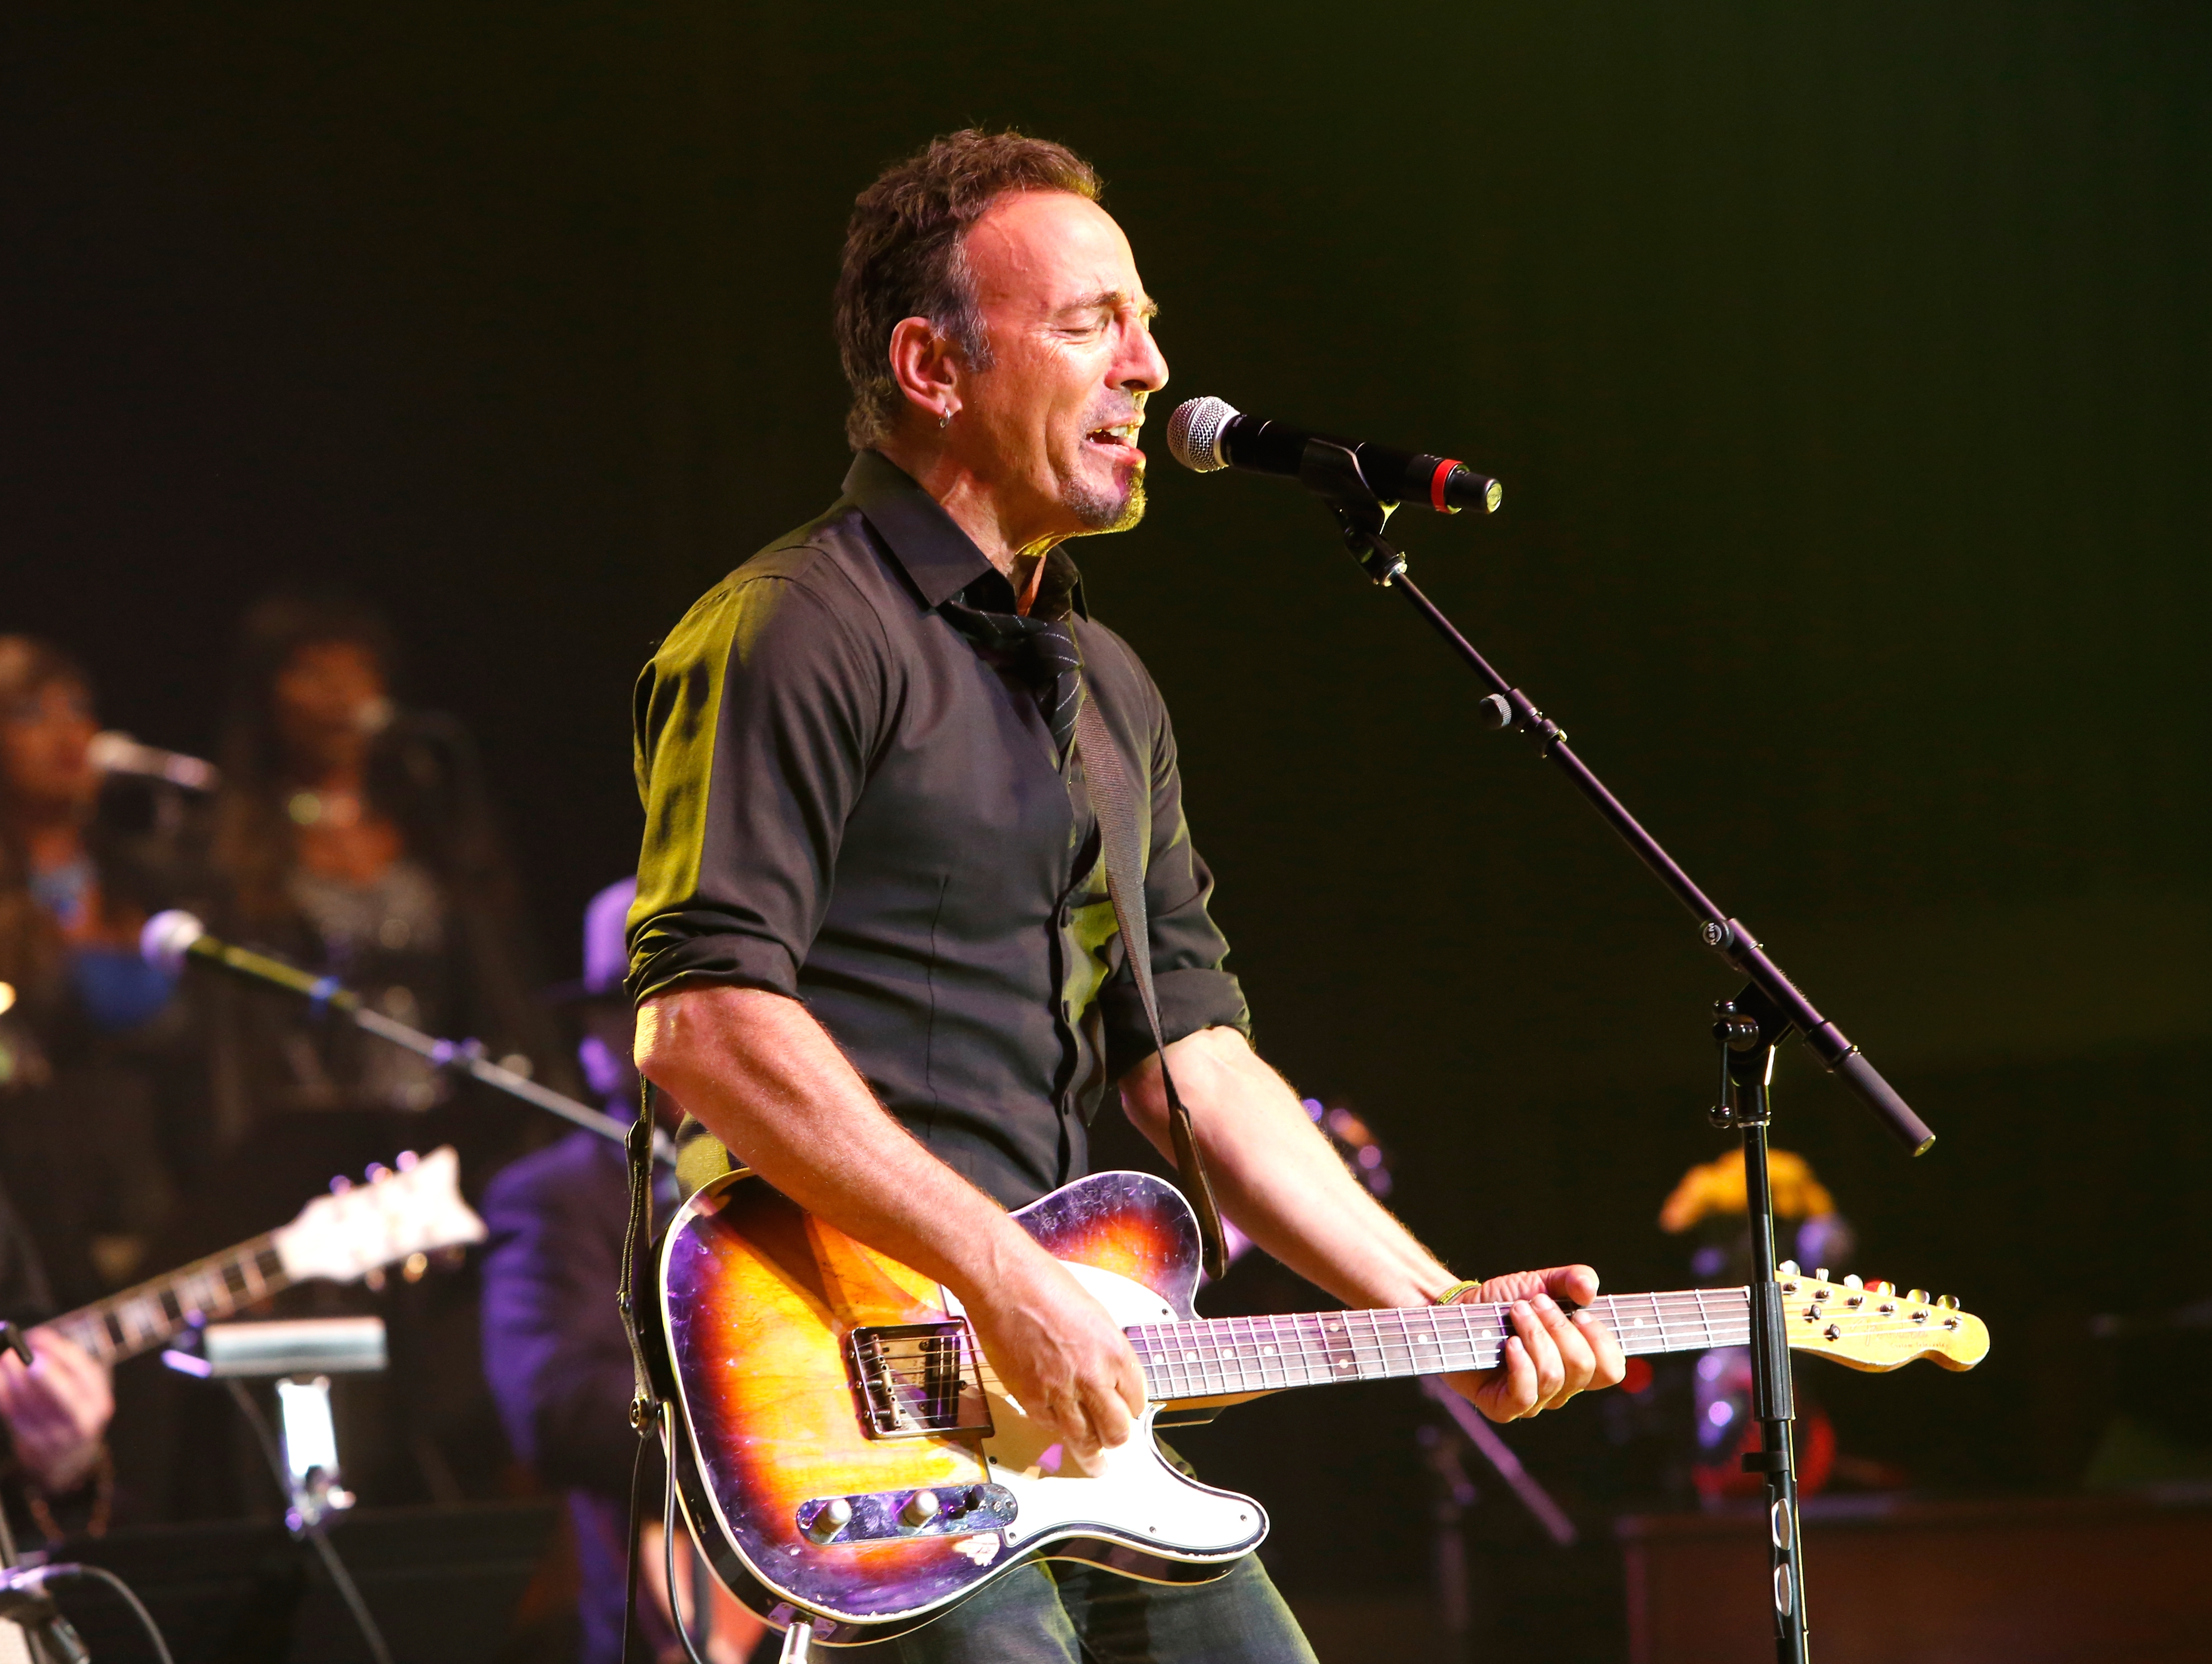 Bruce Springsteen Wallpapers Images Photos Pictures Backgrounds4530 x 3408